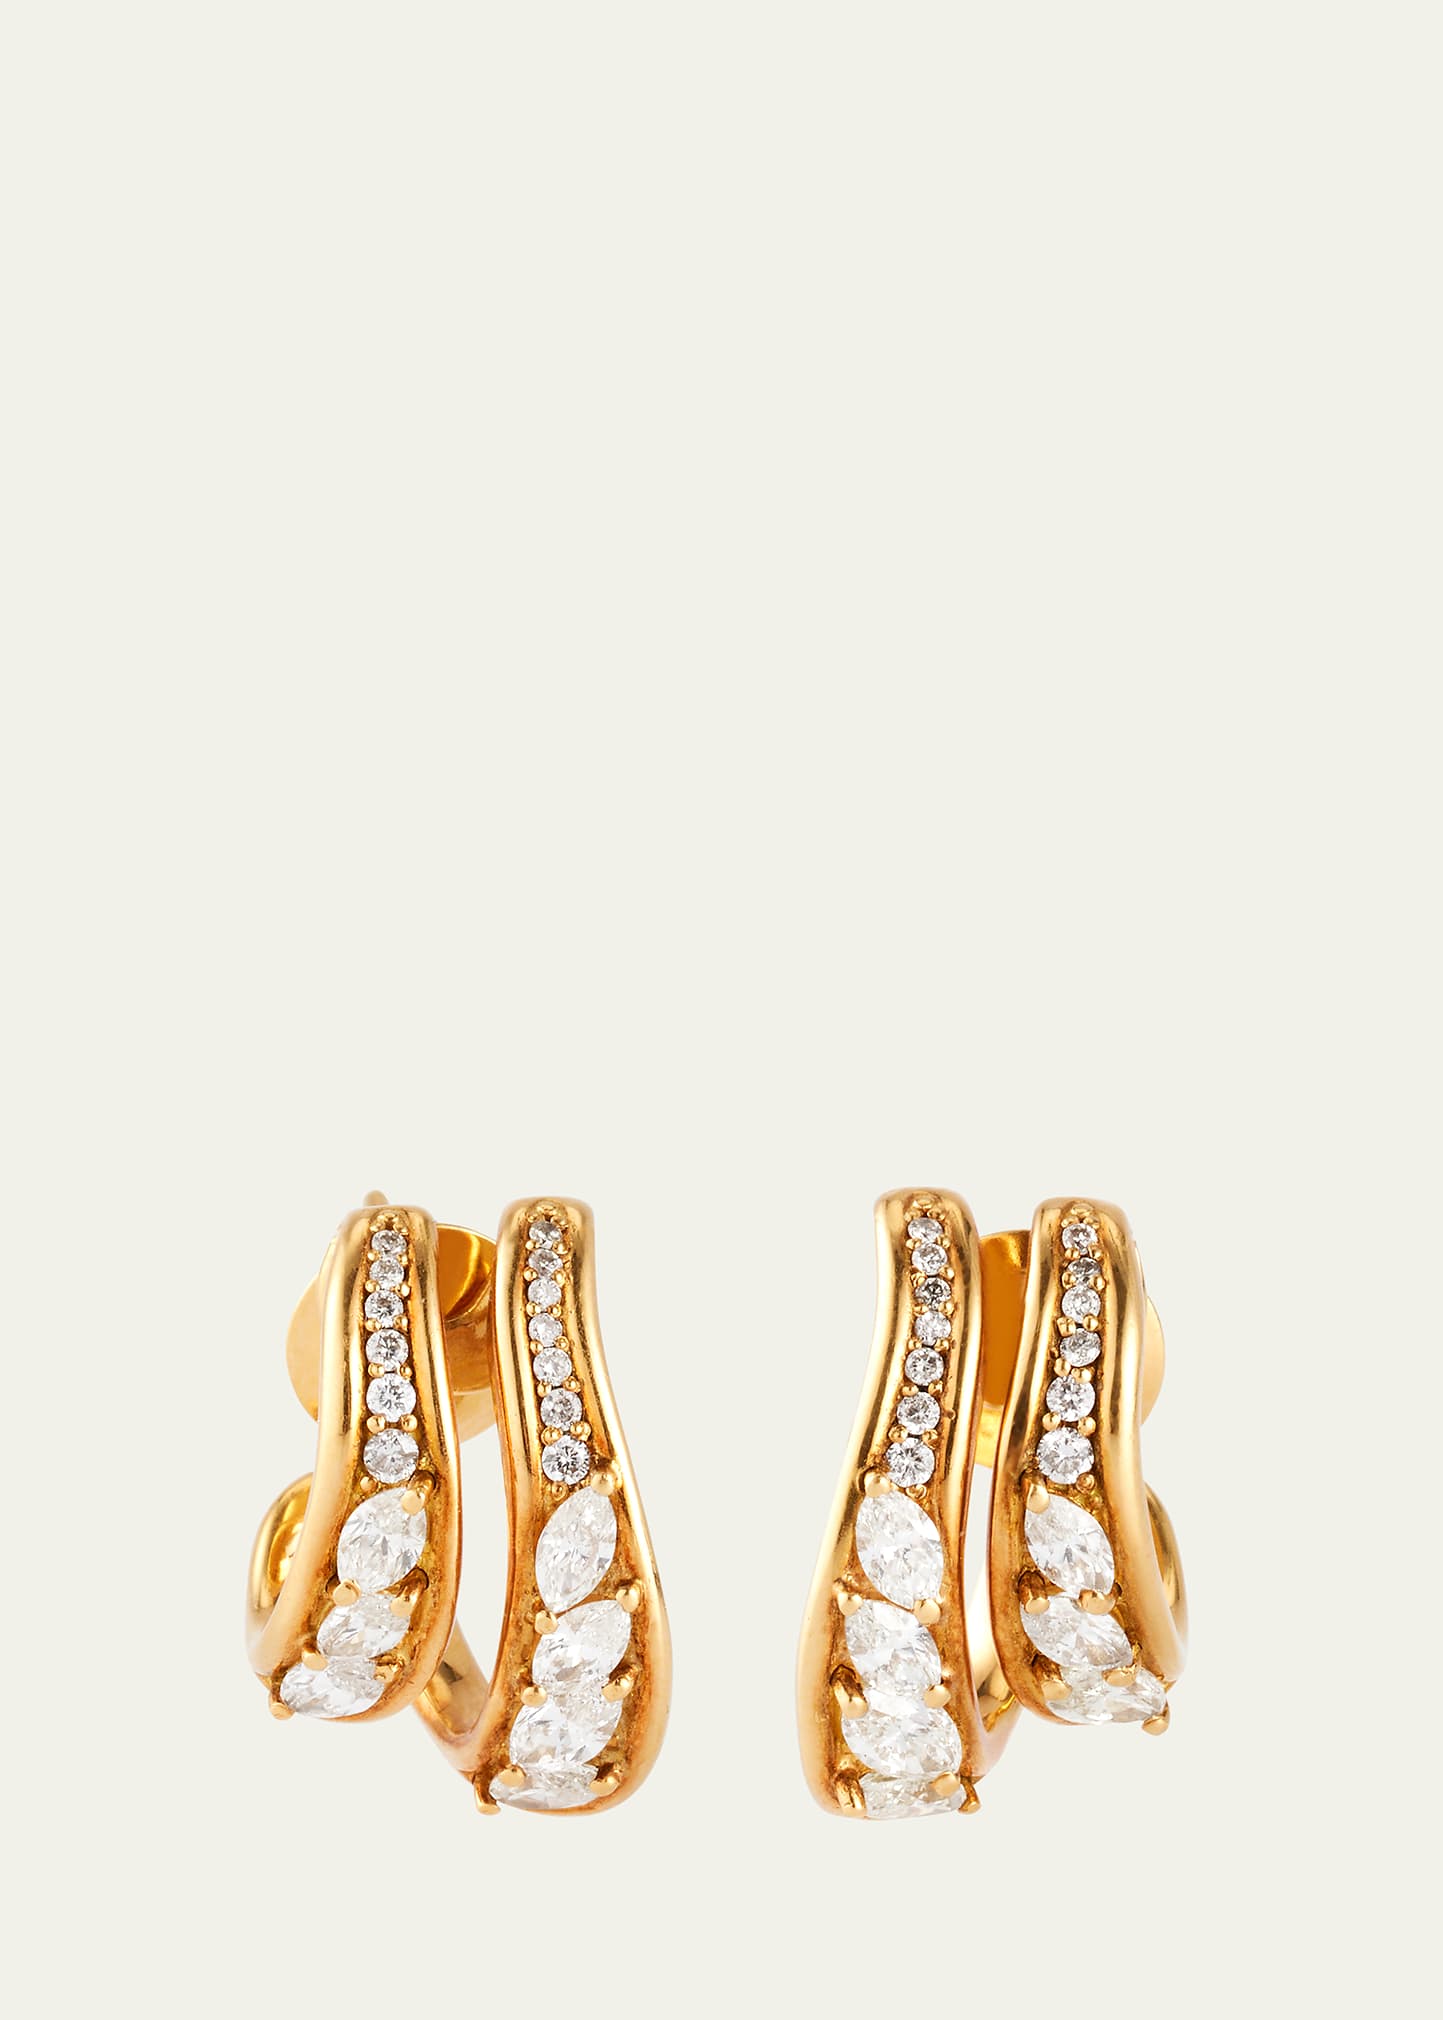 Stream Doubled Hoop Earrings in 18k Yellow Gold and Diamonds